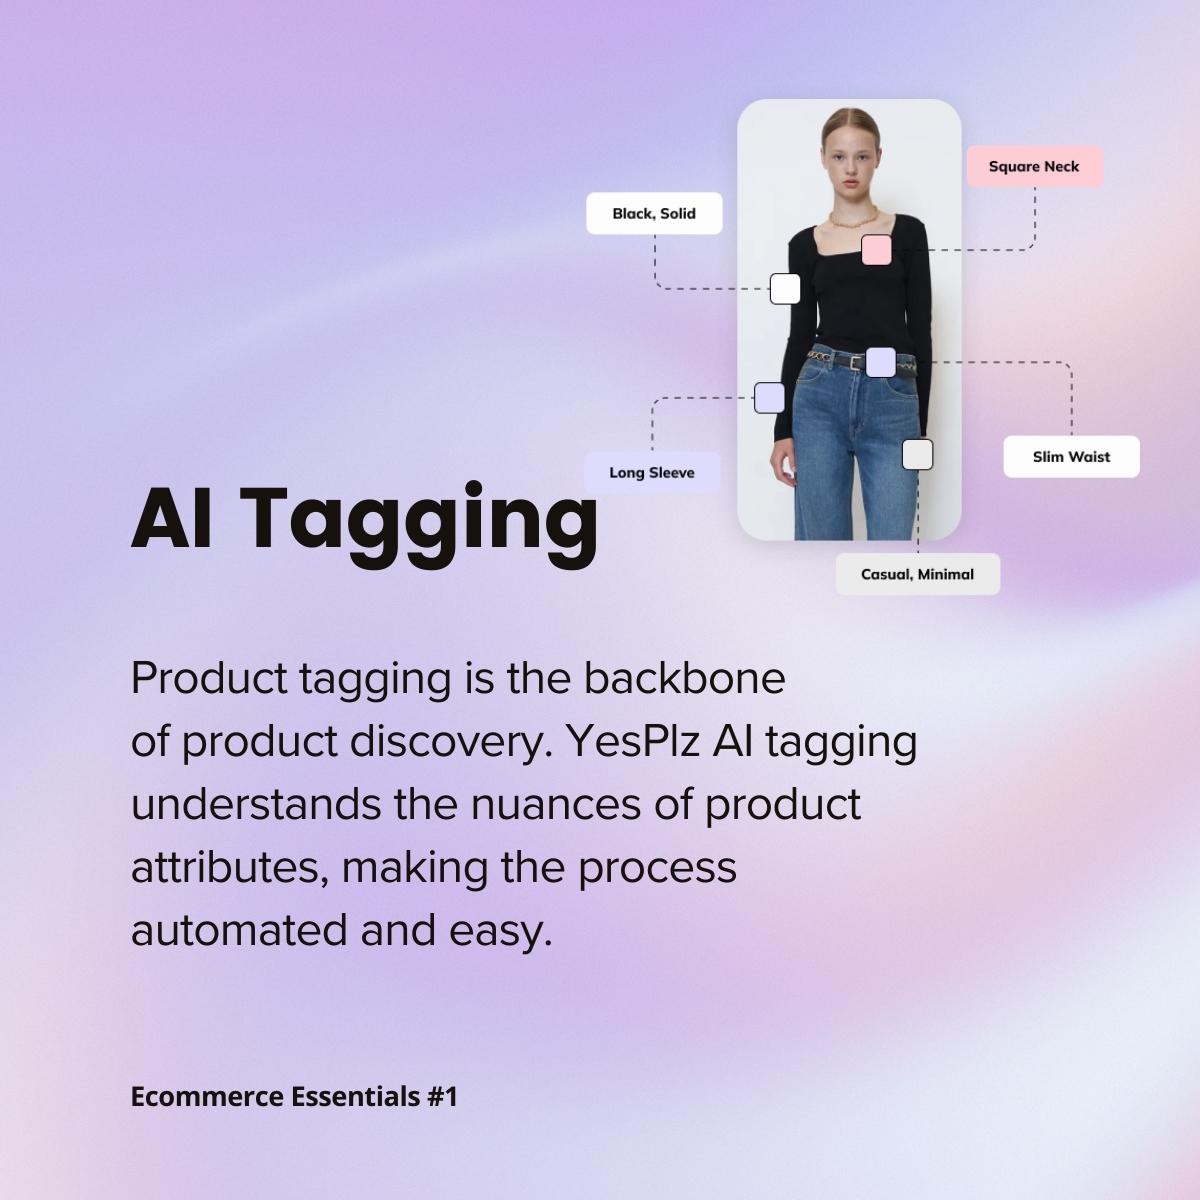 AI tagging is an ecommerce essential